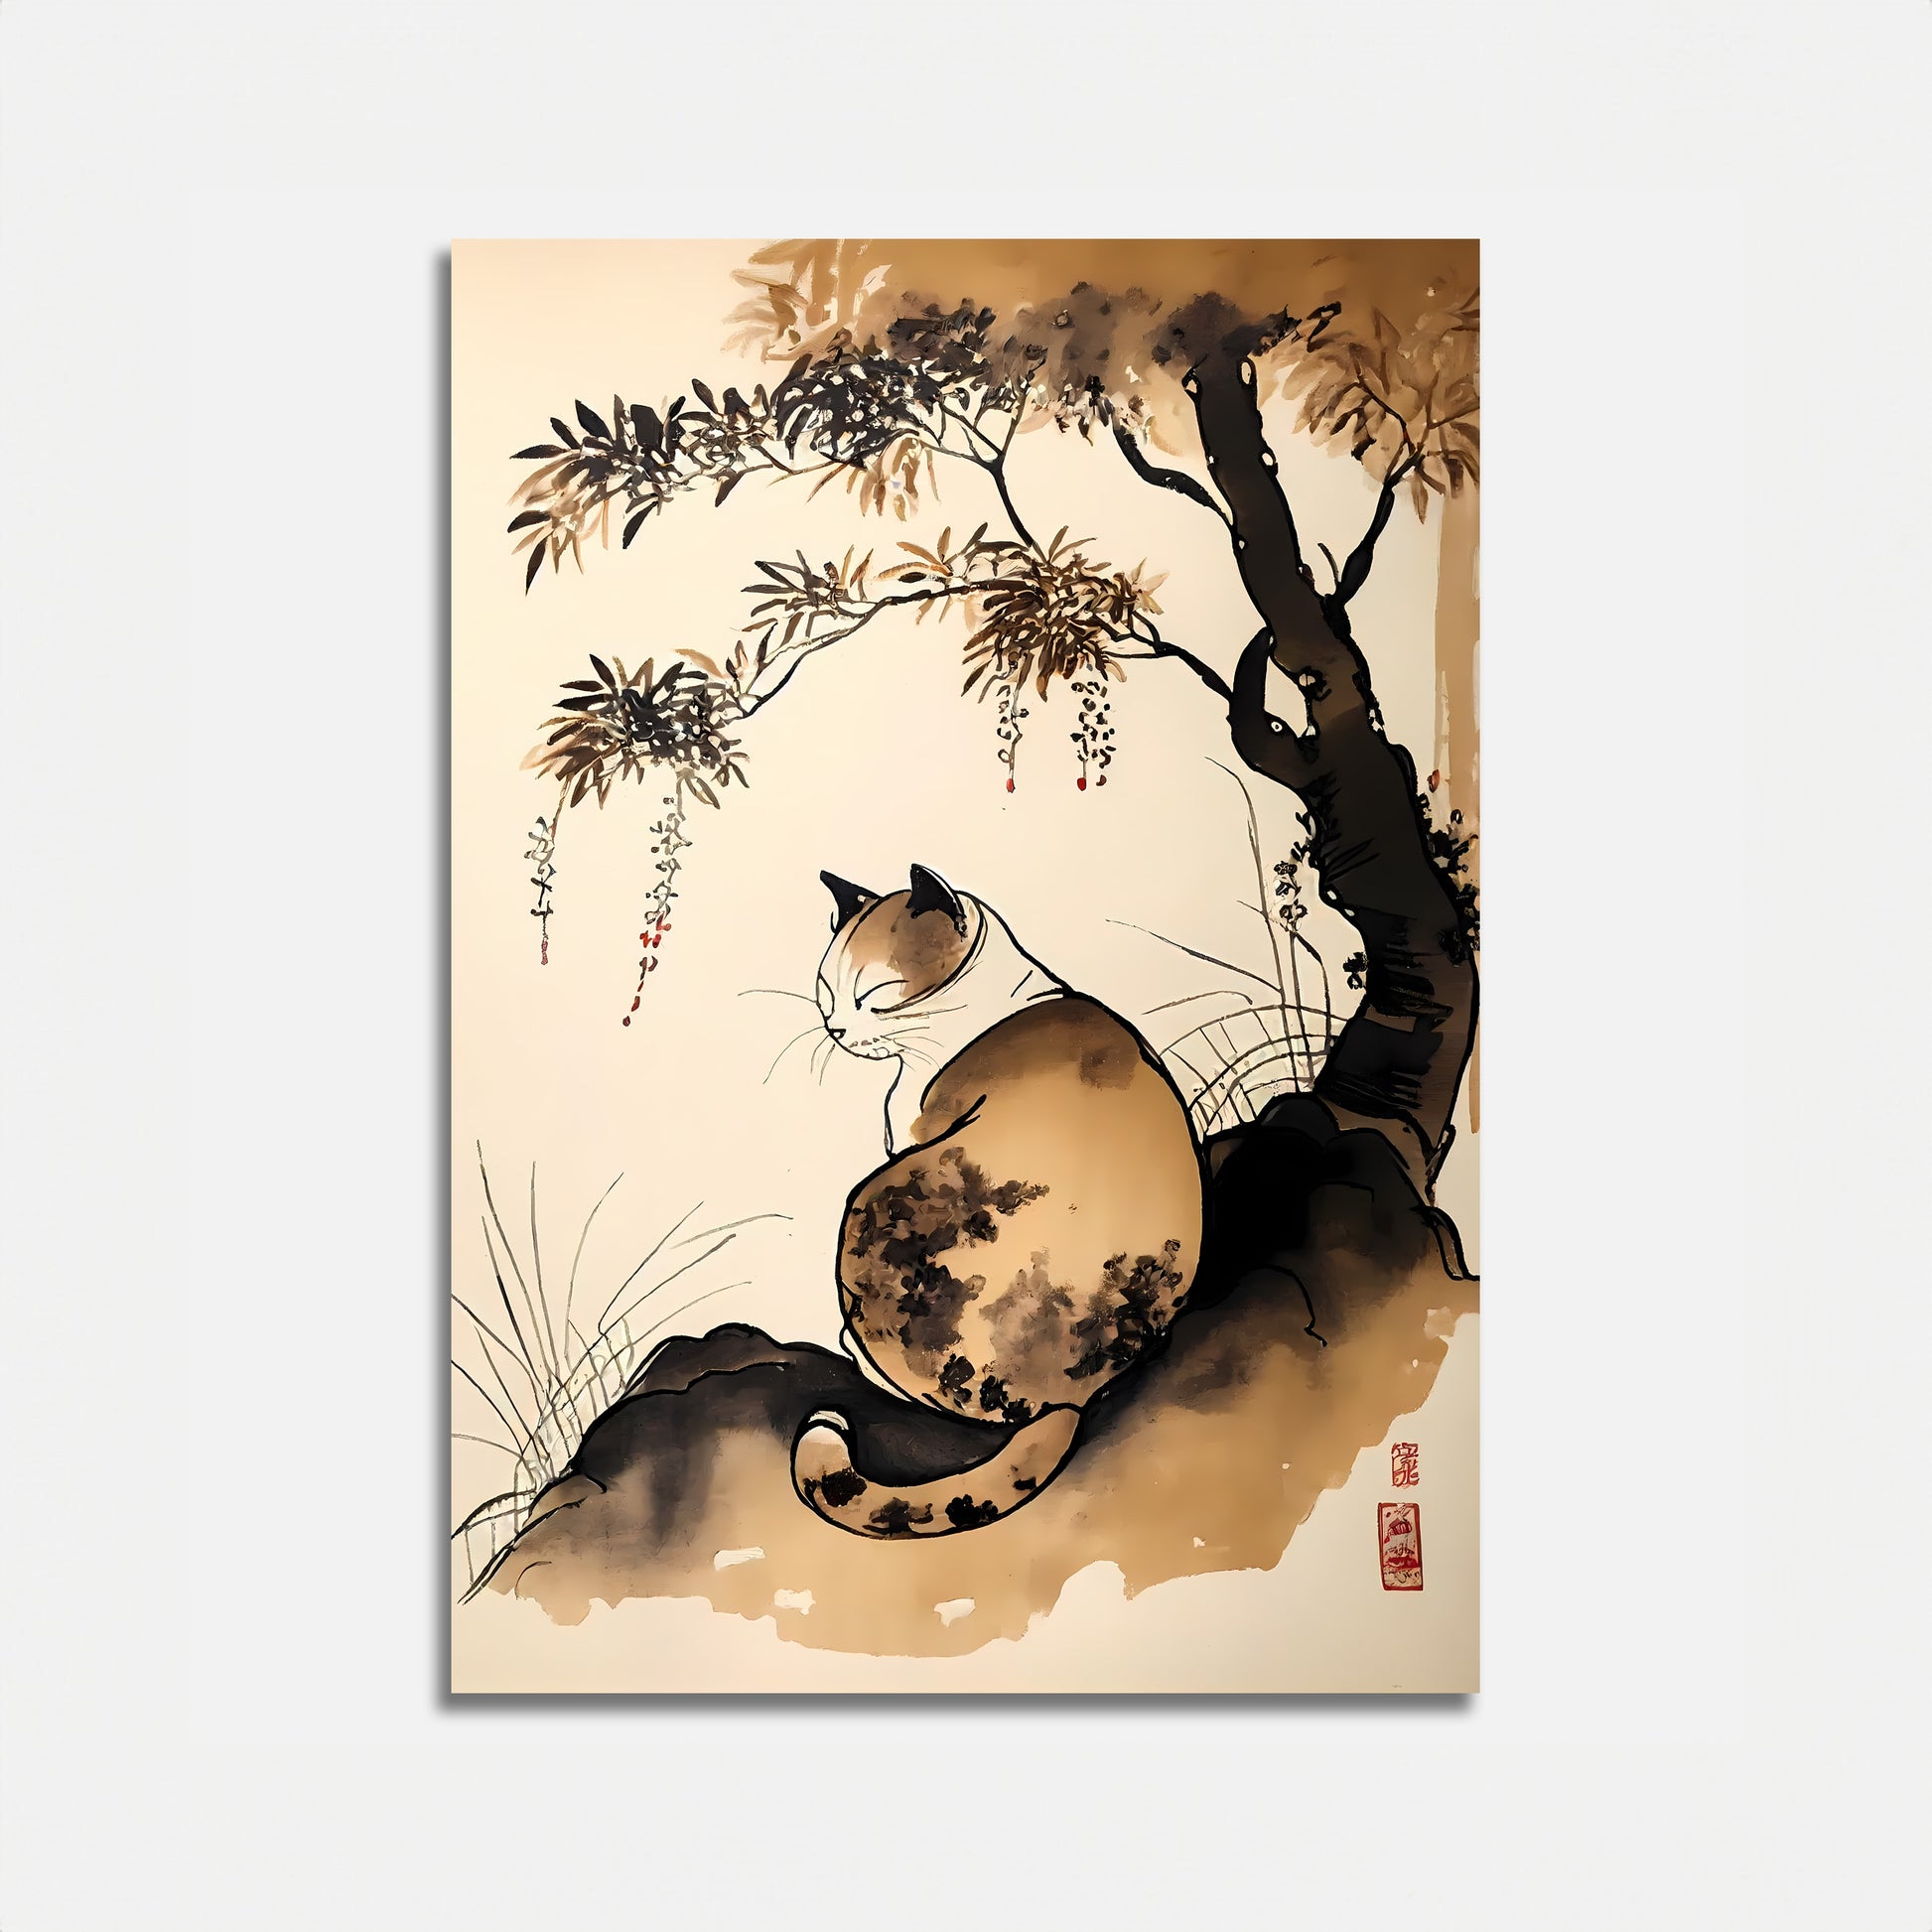 A traditional Asian ink painting of a cat sitting under a tree.